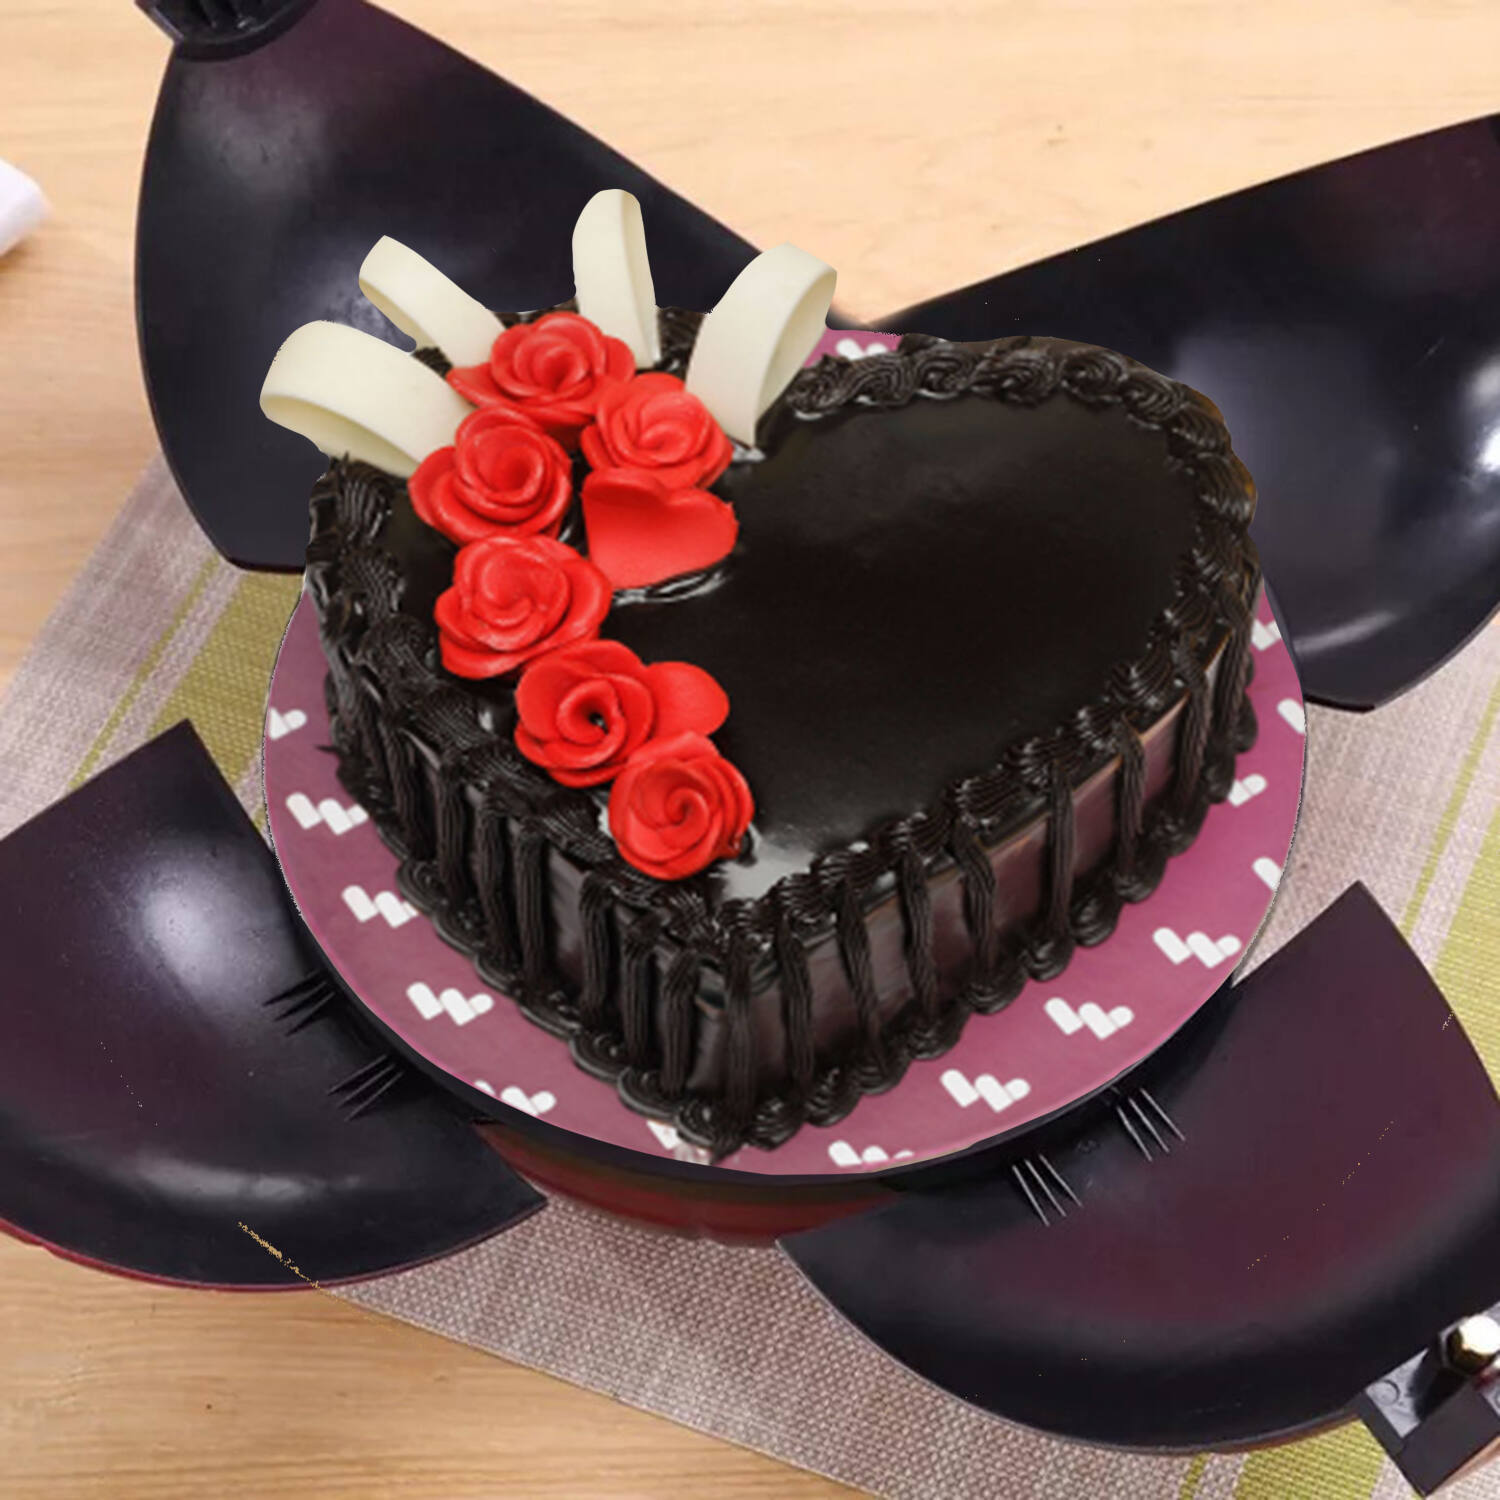 Birthday Cake For Wife | Make her birthday special with cakes